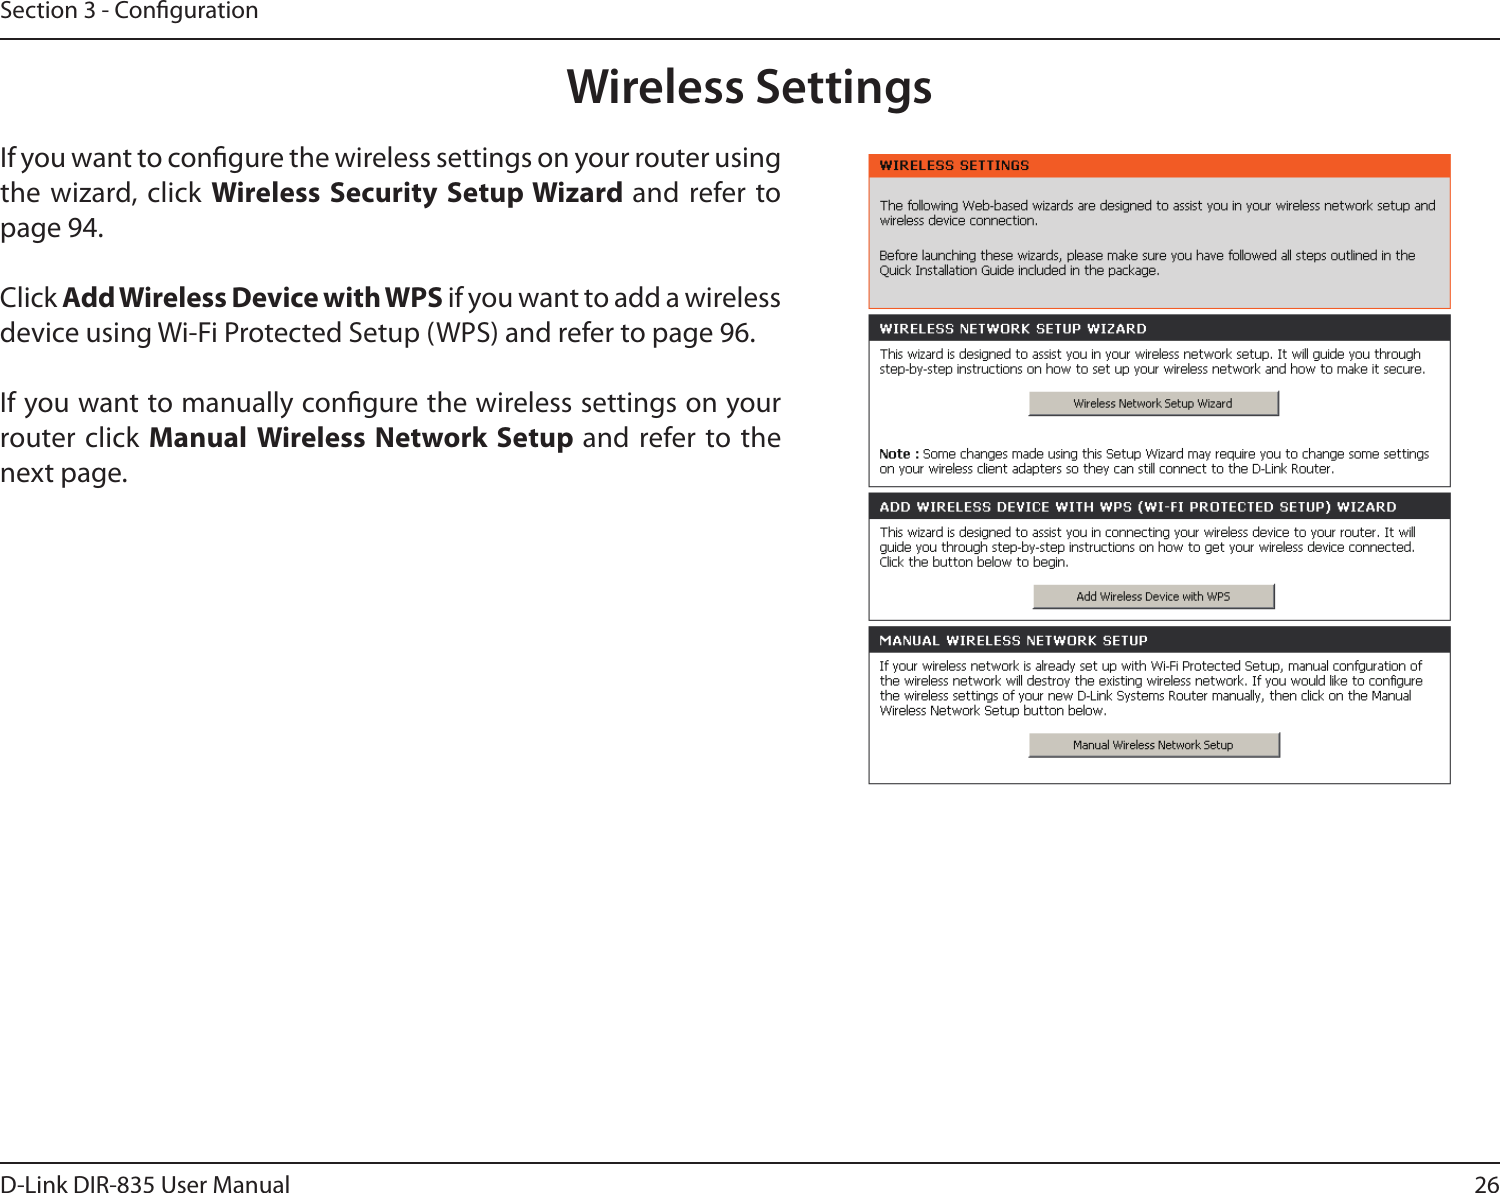 26D-Link DIR-835 User ManualSection 3 - CongurationWireless SettingsIf you want to congure the wireless settings on your router using the wizard, click  Wireless Security Setup Wizard and  refer  to page 94.Click Add Wireless Device with WPS if you want to add a wireless device using Wi-Fi Protected Setup (WPS) and refer to page 96.If you want to manually congure the wireless settings on your router click Manual Wireless Network Setup and refer to the next page.